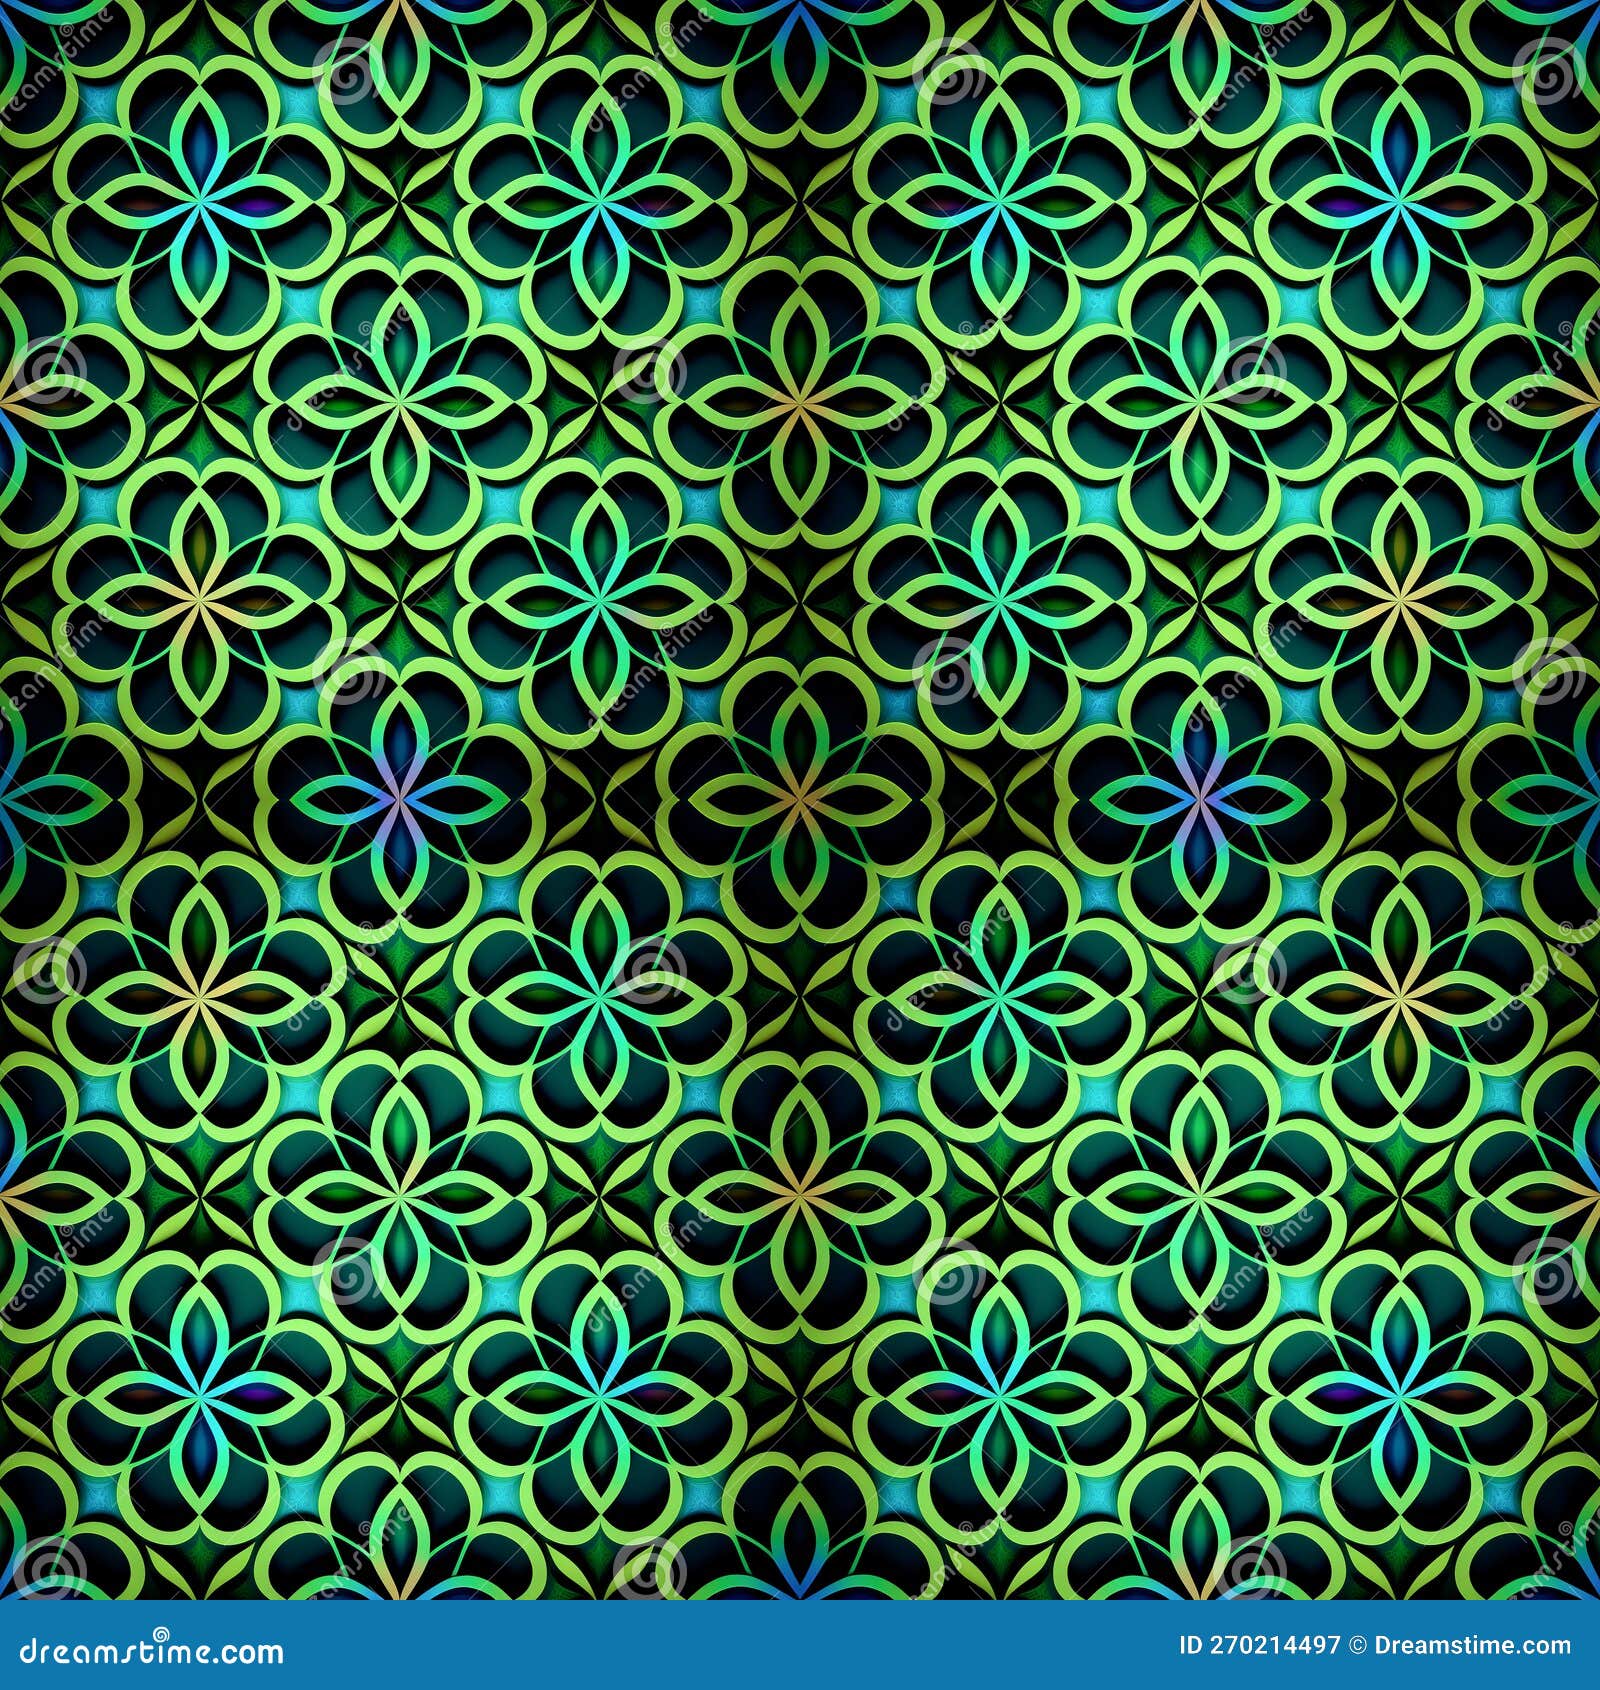 Repeating Pattern Photos, Download The BEST Free Repeating Pattern Stock  Photos & HD Images